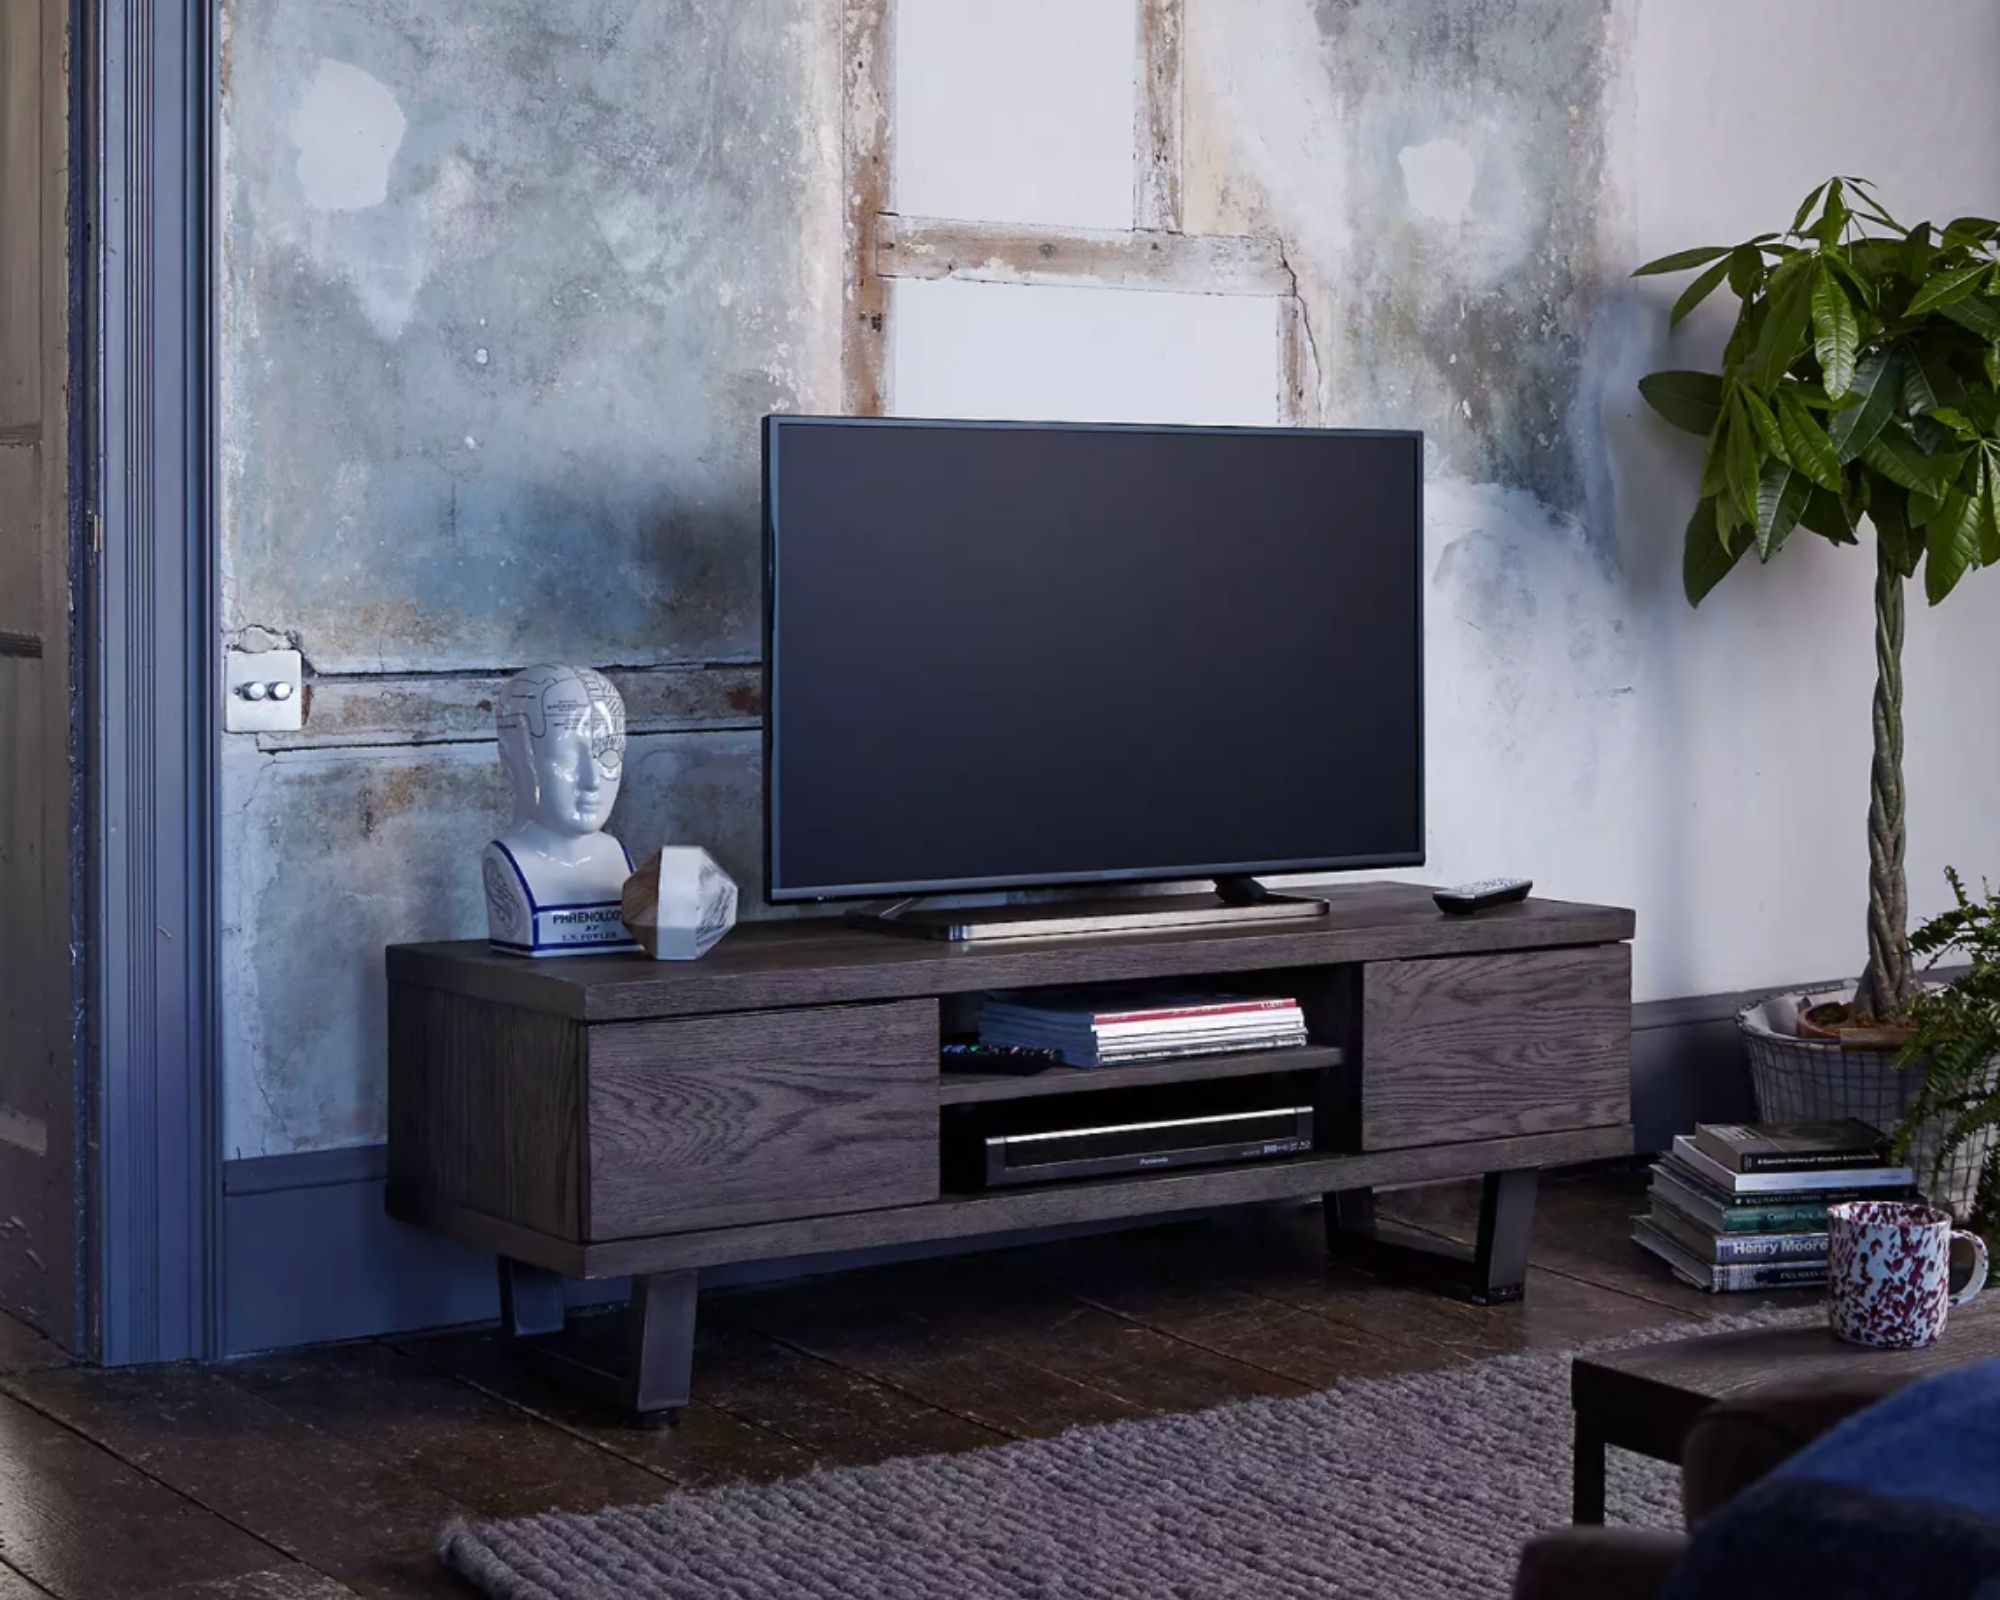 Shopping edit: 10 stylish TV stands to upgrade your living room | Real